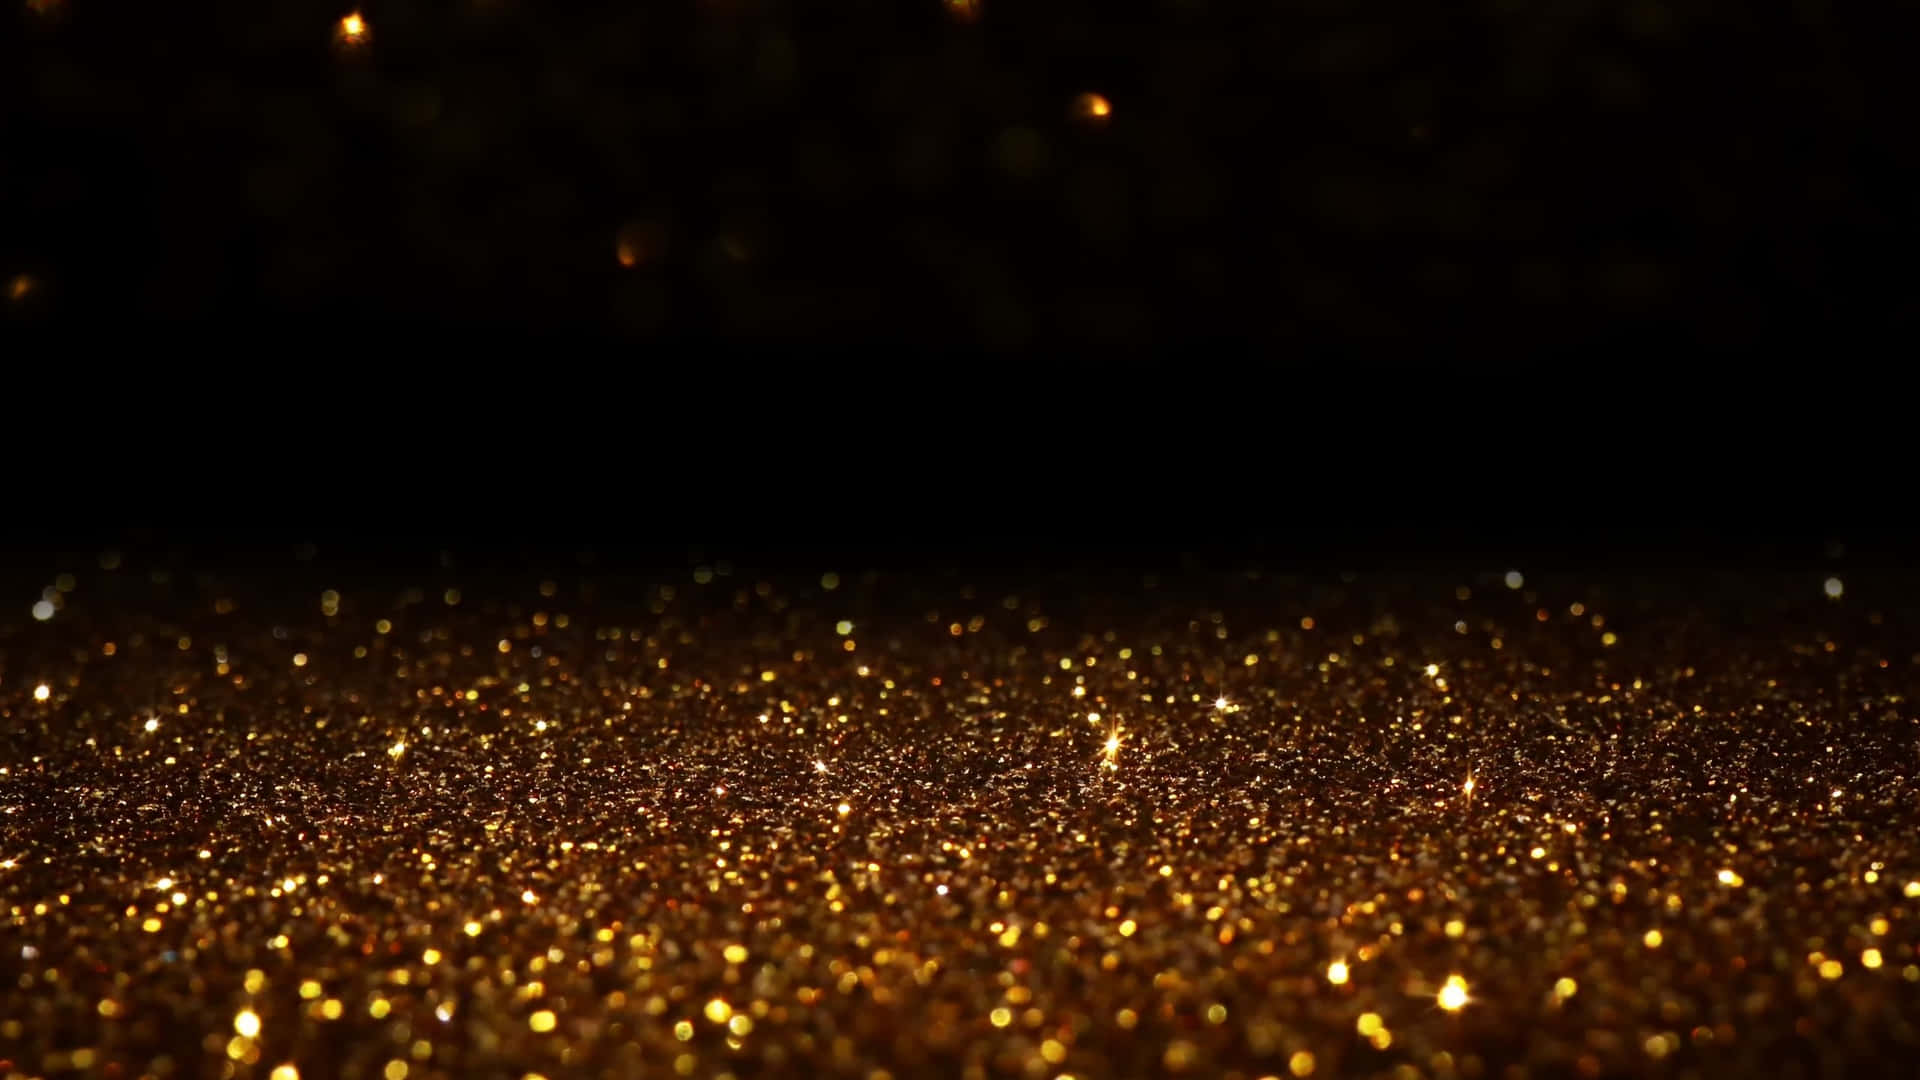 Glowing Black And Gold Glitter Particles Wallpaper